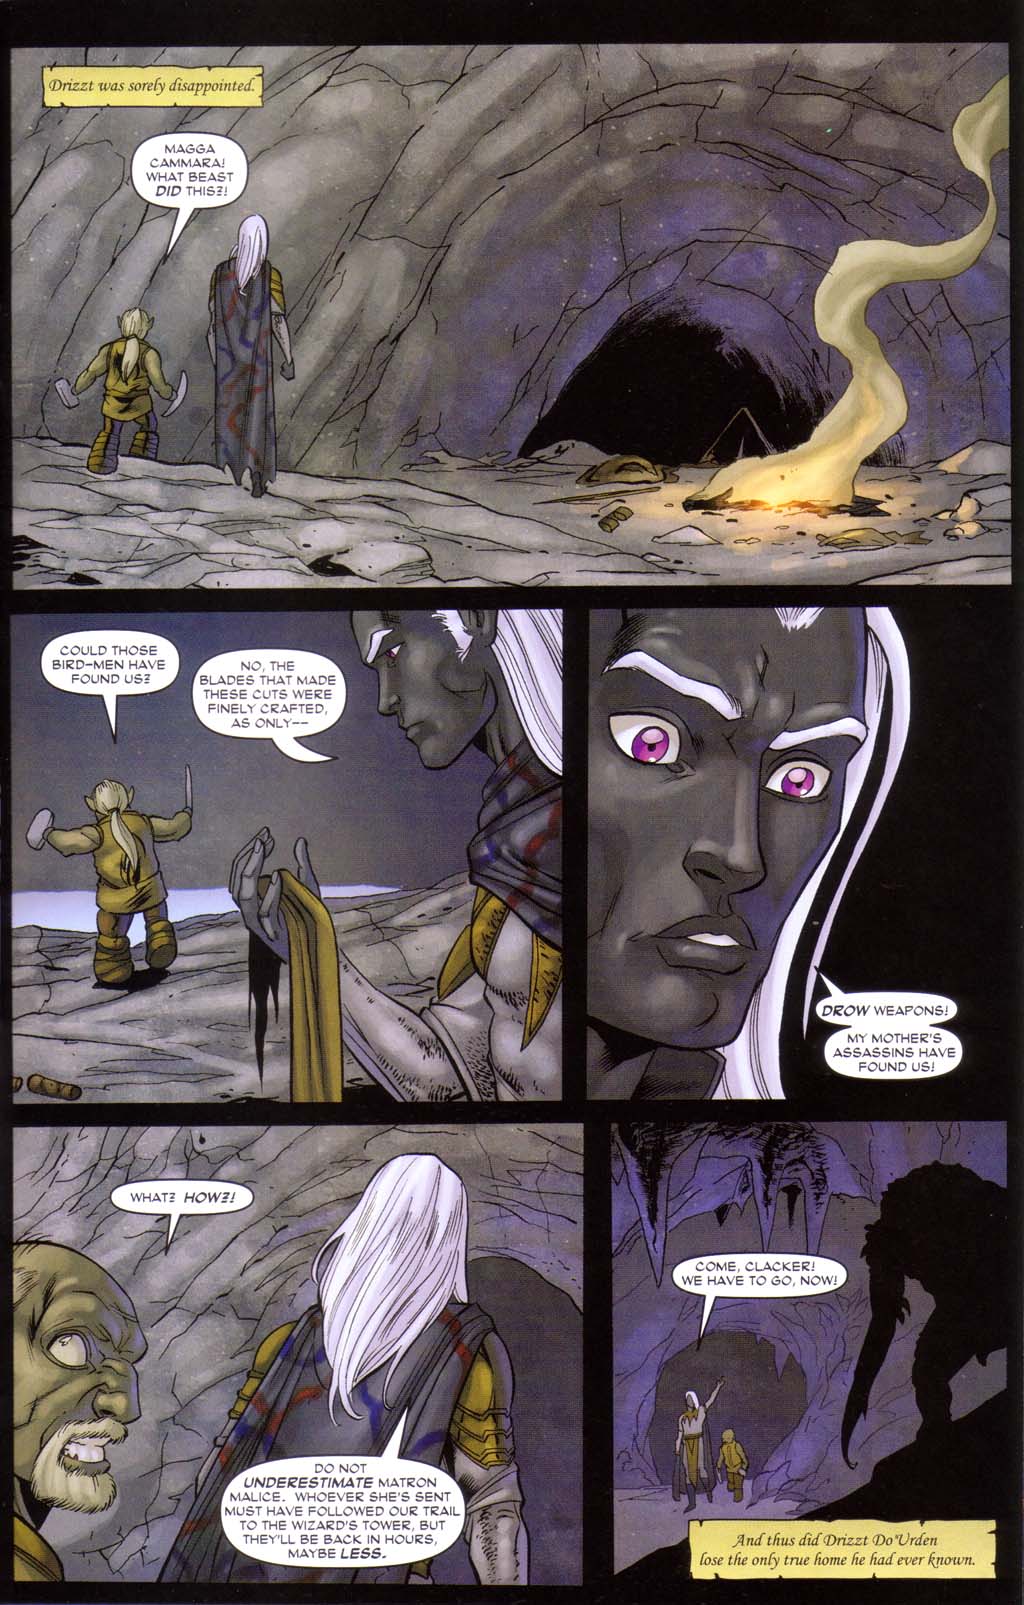 Forgotten Realms: Exile #2 - Issue #2, Part 2